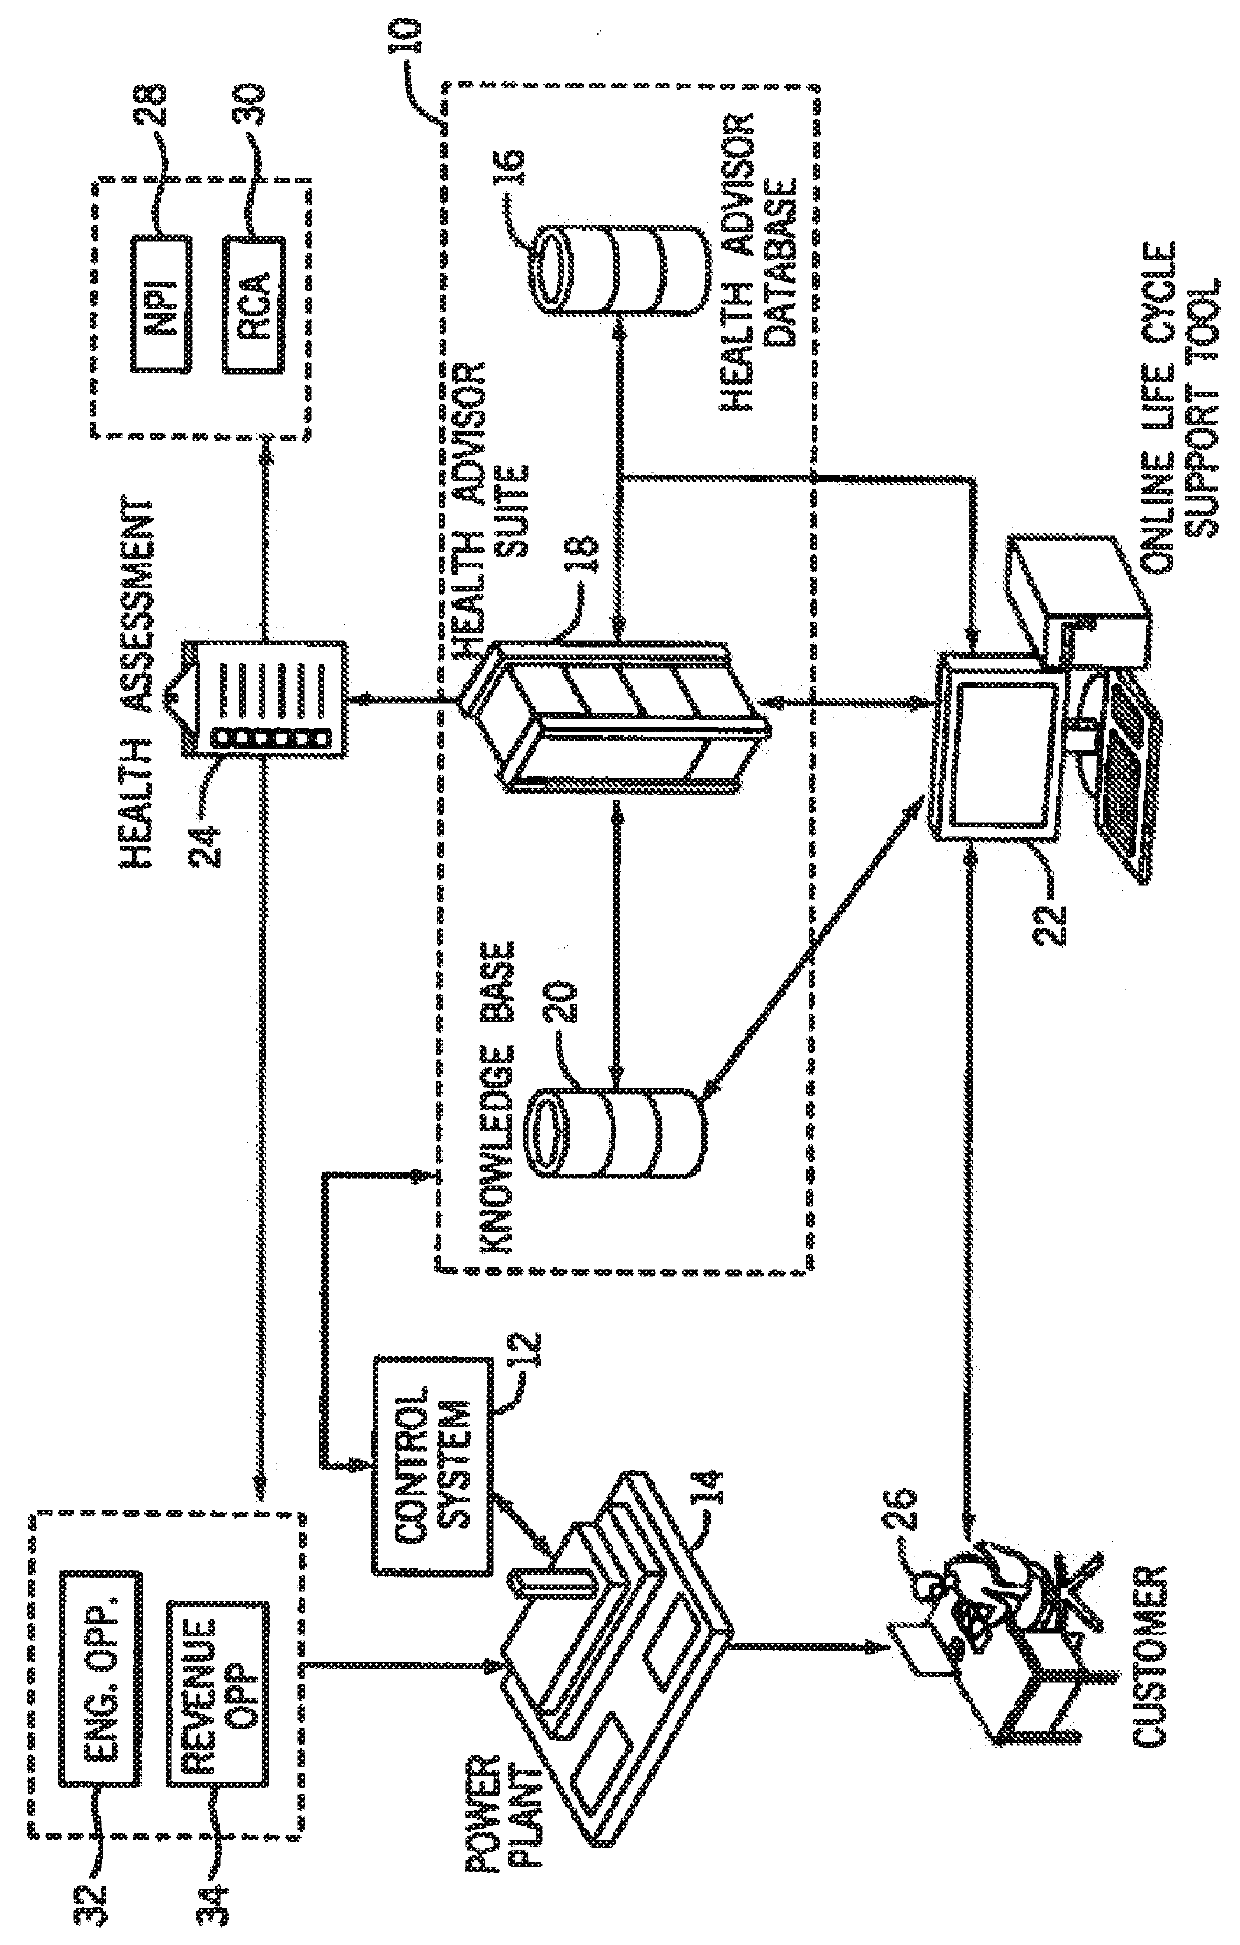 System and method for maintaining the health of a control system